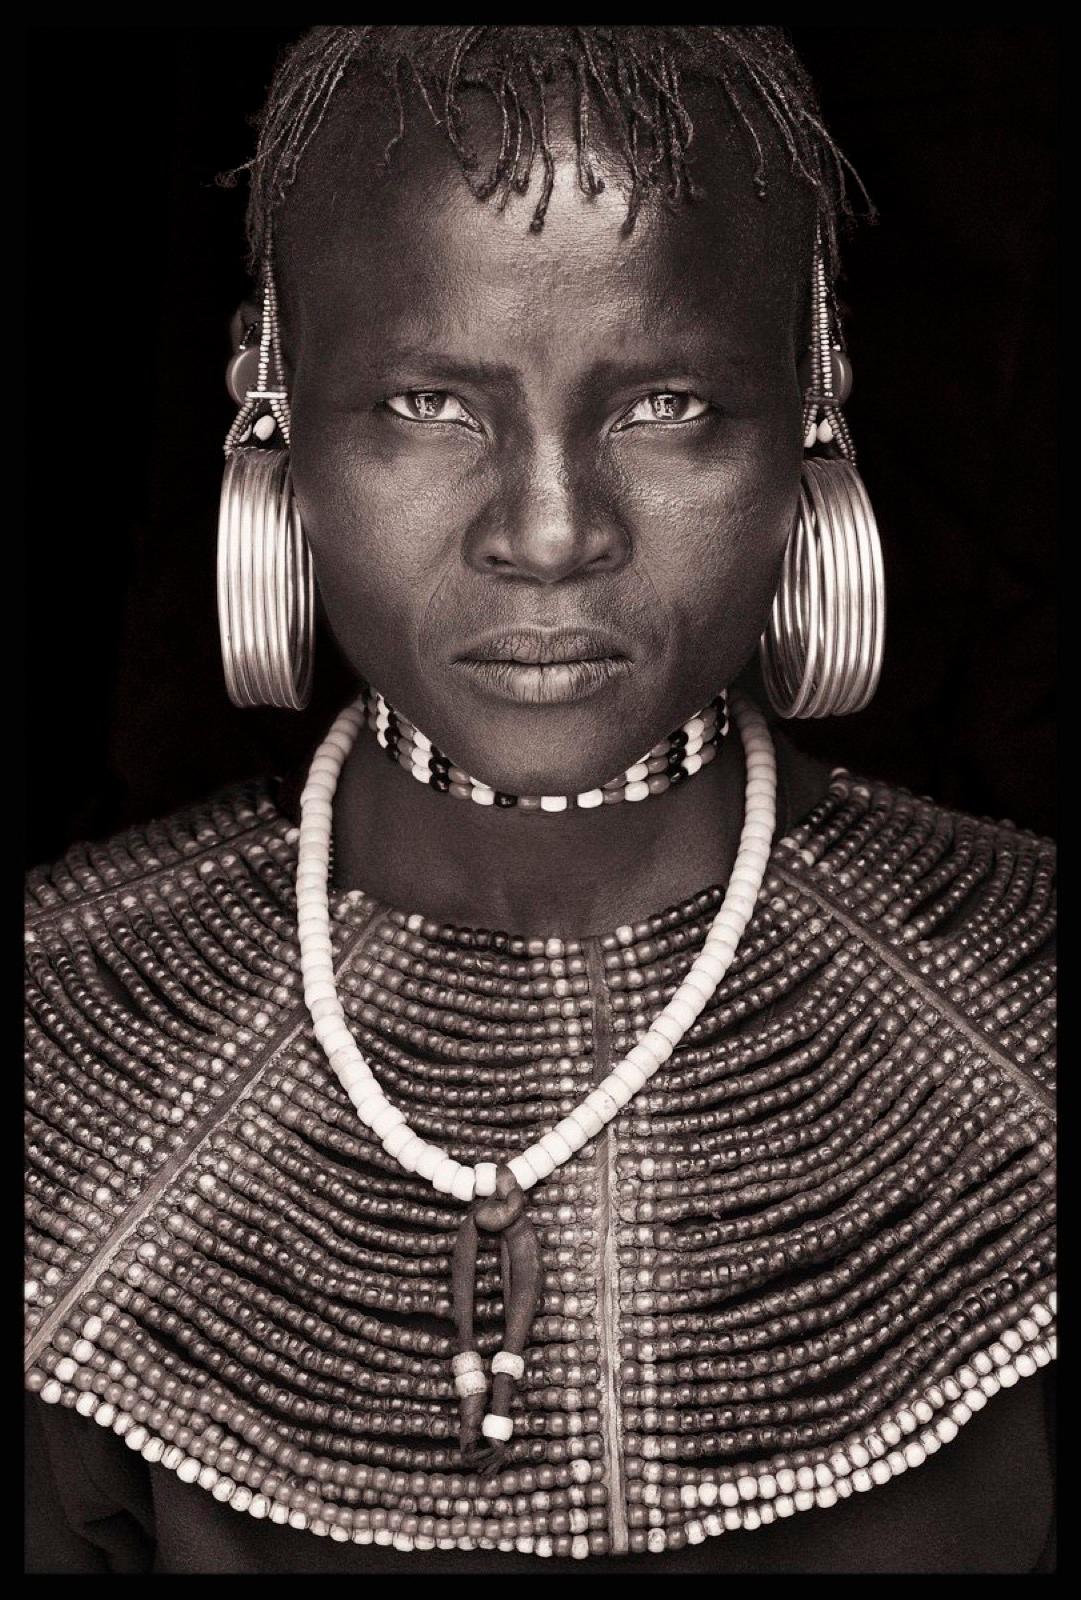 I came across the intense stare of this Pokot lady at a Friday market on a mountain summit in northern Kenya; it was the same market where I photographed a Samburu goat herder wrapped in blankets. The Pokot and Samburu are engaged in a constant